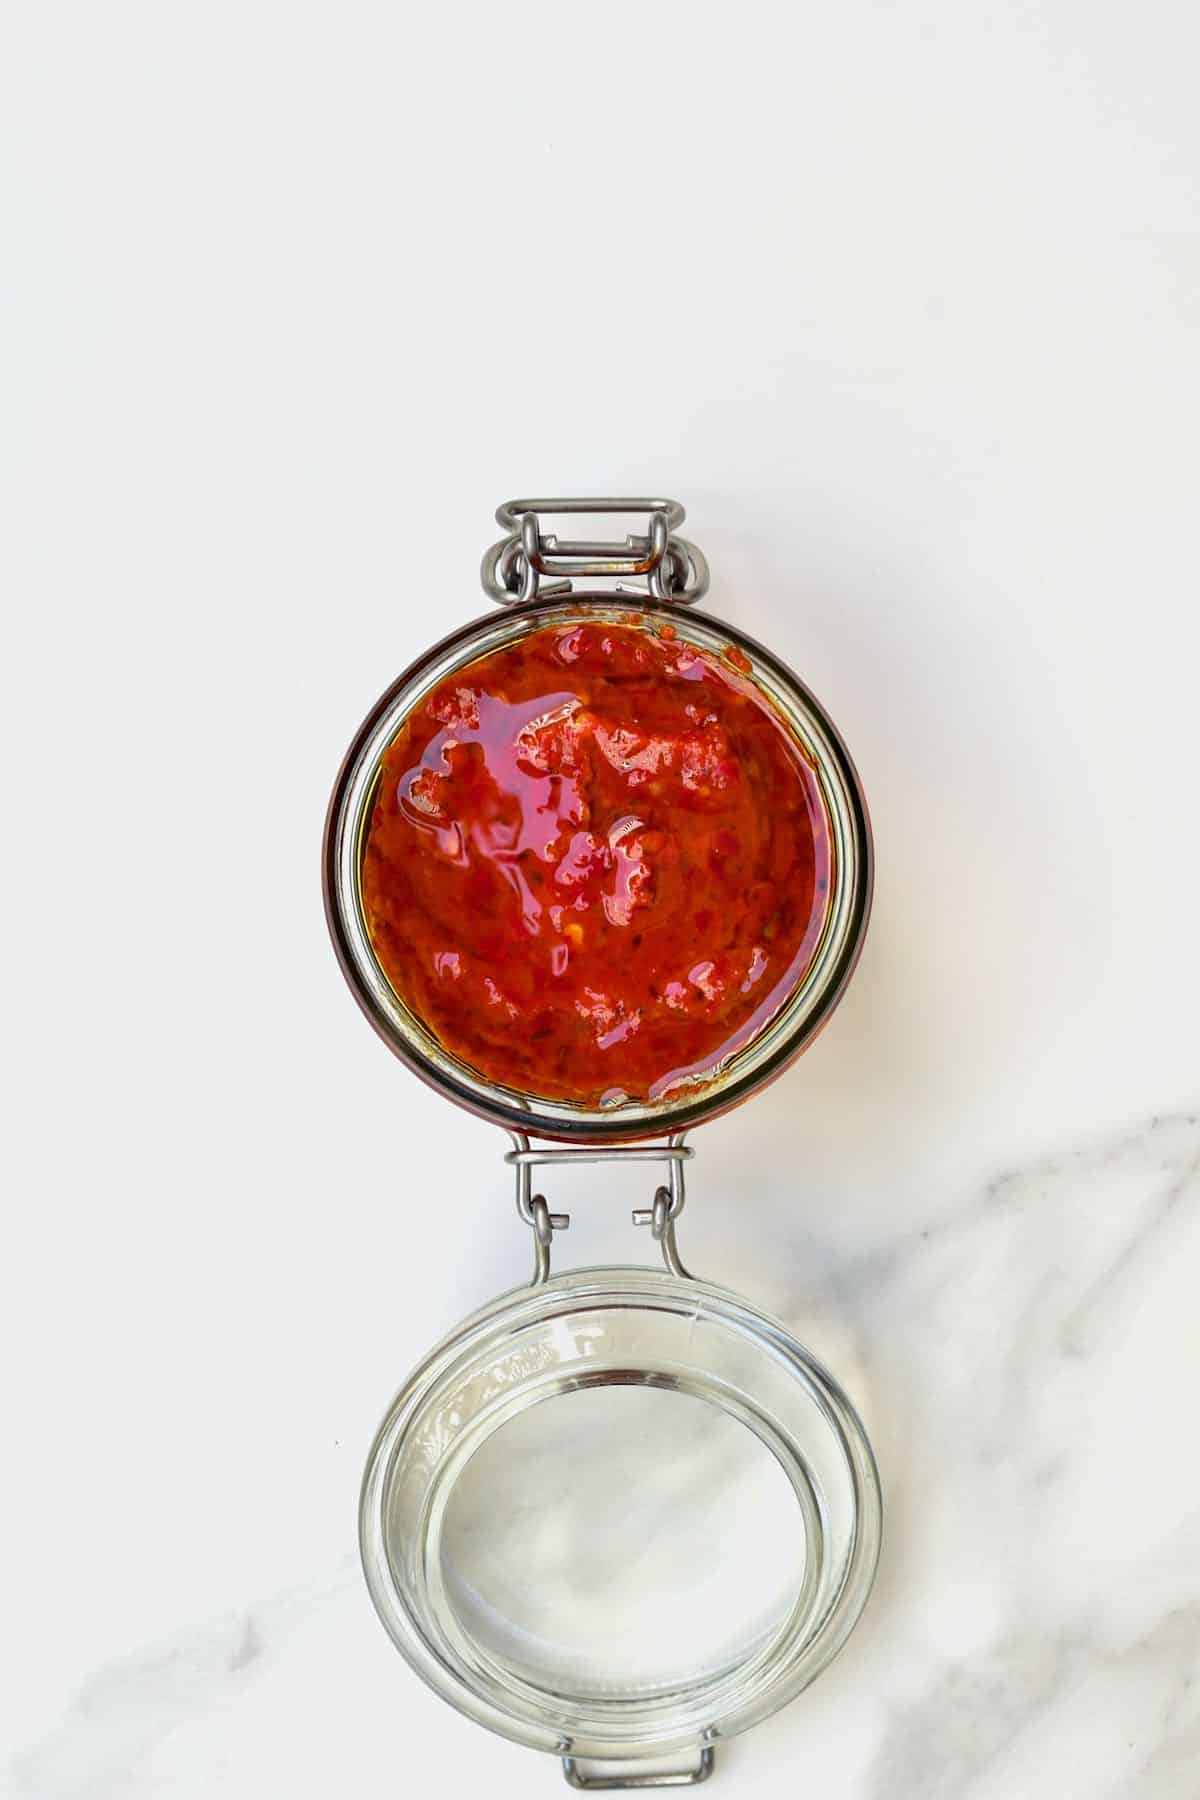 Harissa dip in a jar covered with a layer of oil